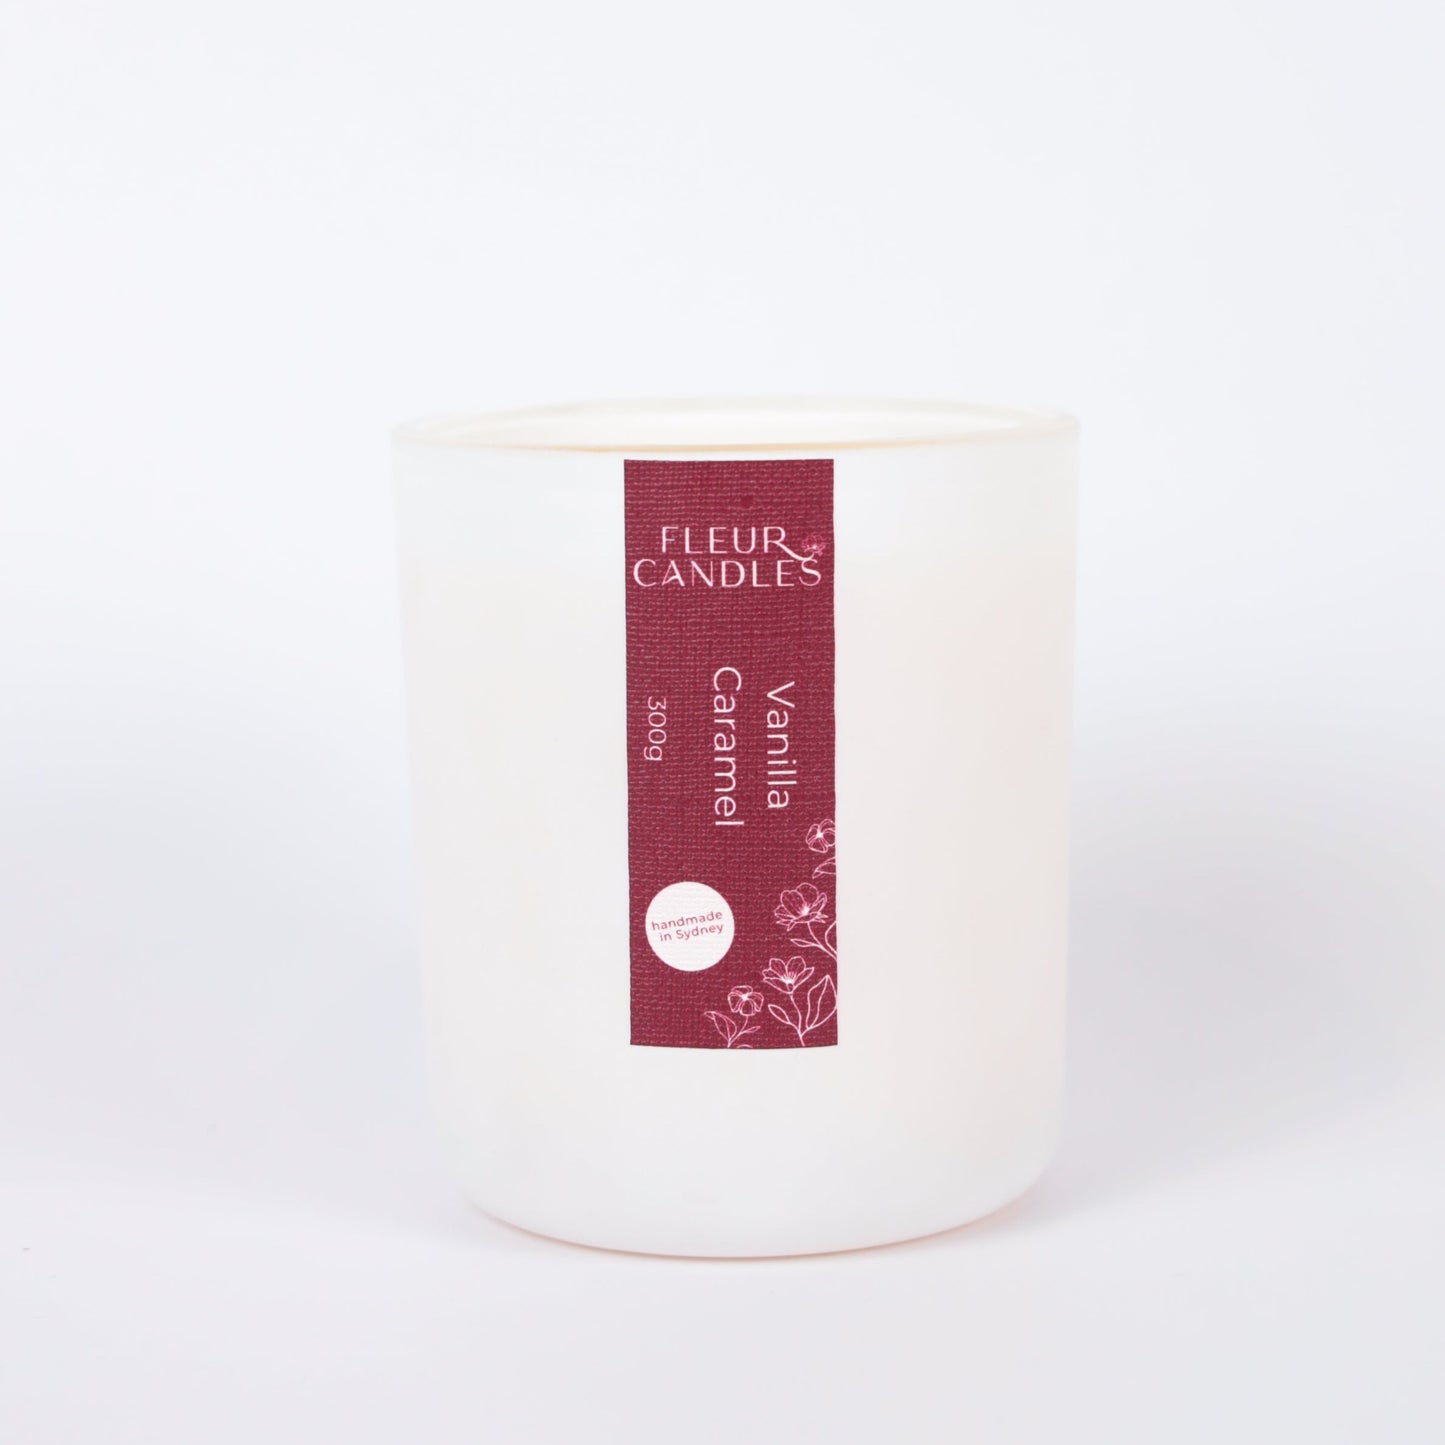 white candle with burgundy label on a white background. fragrance is "vanilla caramel"